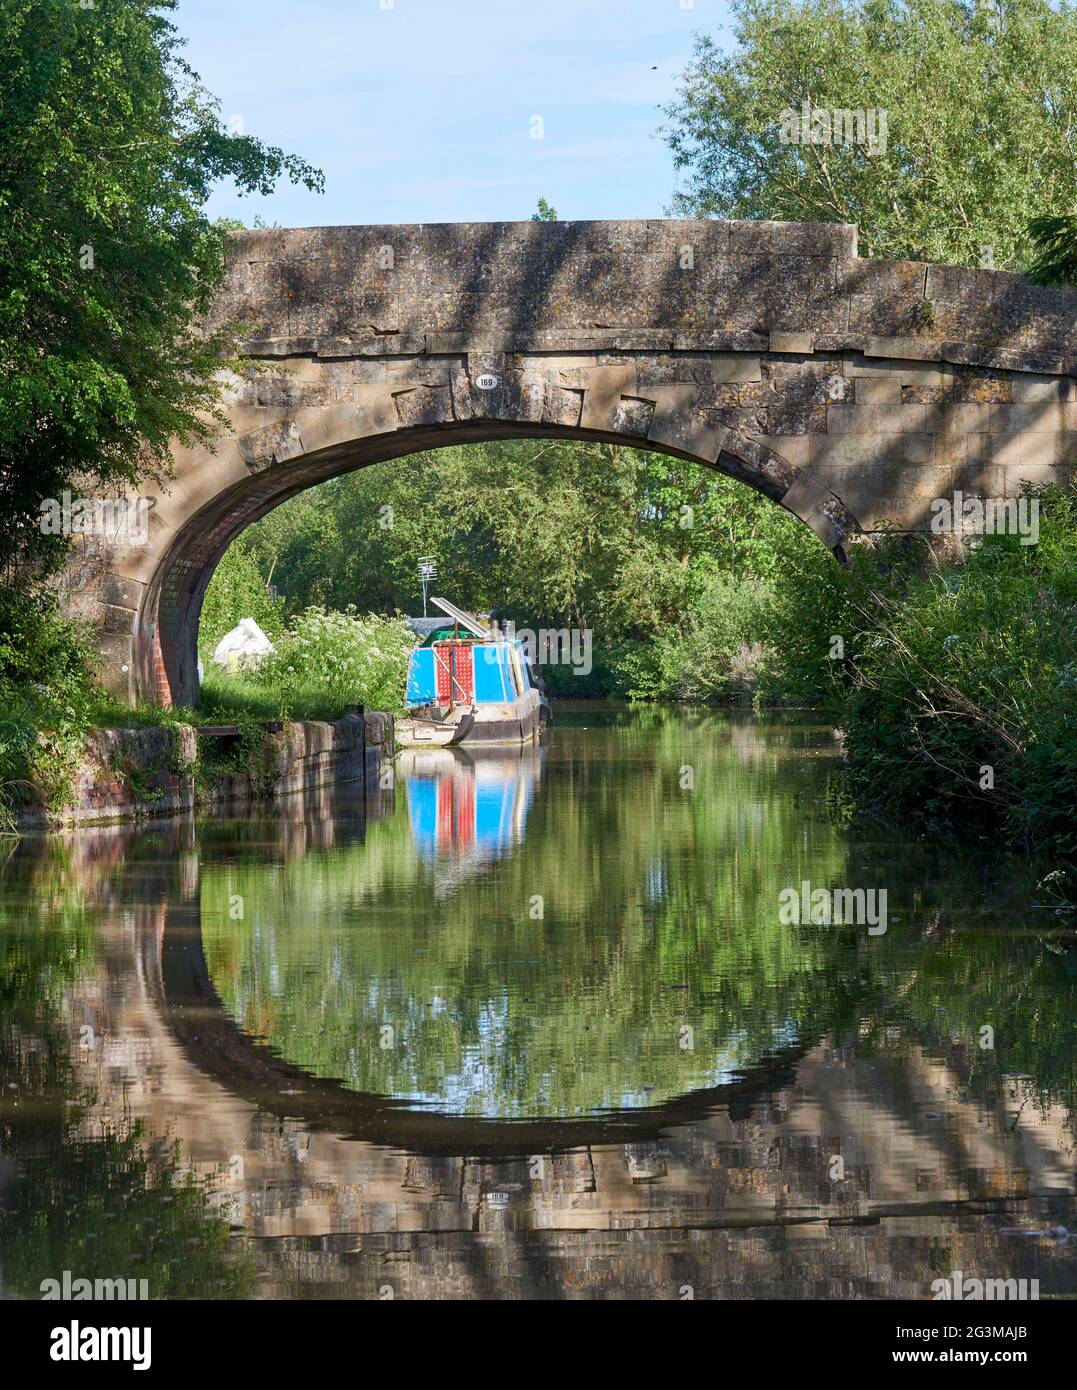 Canal life on the Kennet & Avon Canal, between Bath and Bradford upon Avon, South West England, UK Stock Photo